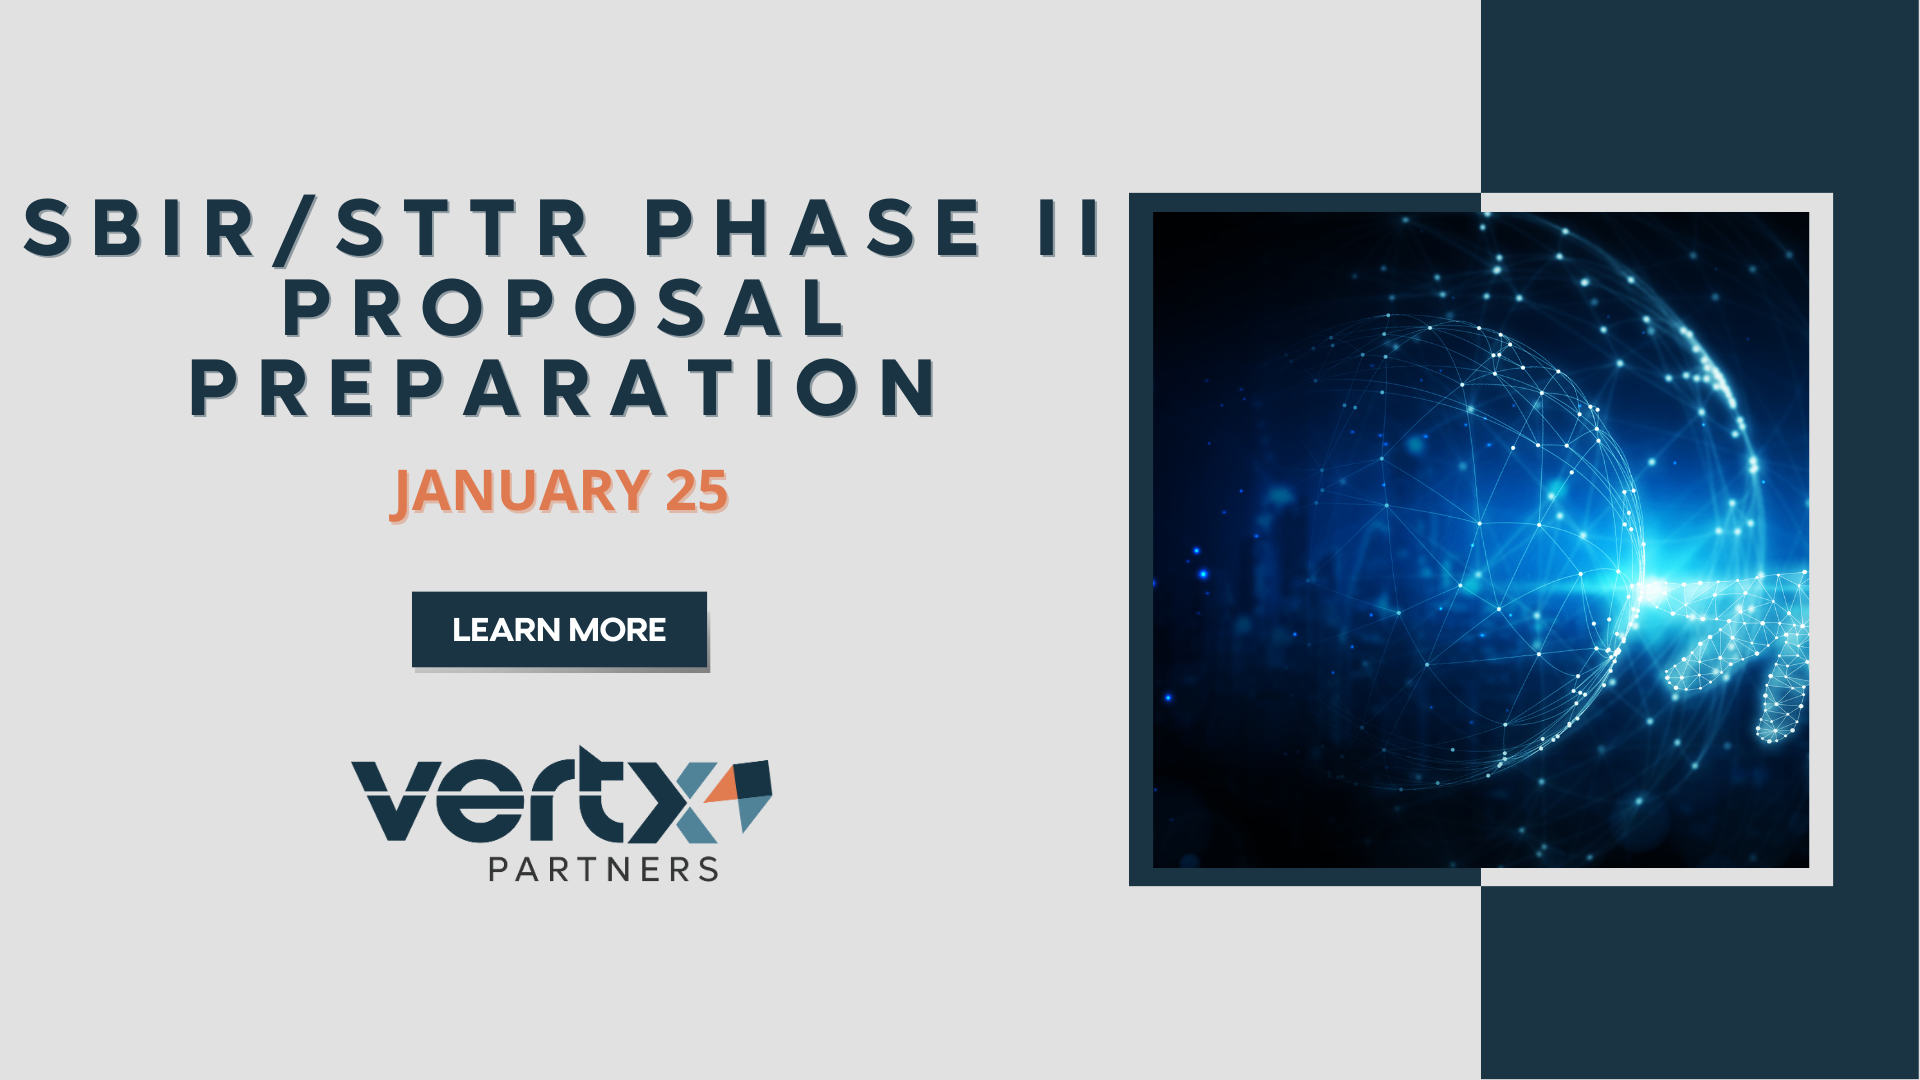 This graphic shows the title SBIR/STTR Phase II proposal preparation with the date January 25th underneath and a photo of dots connecting together.